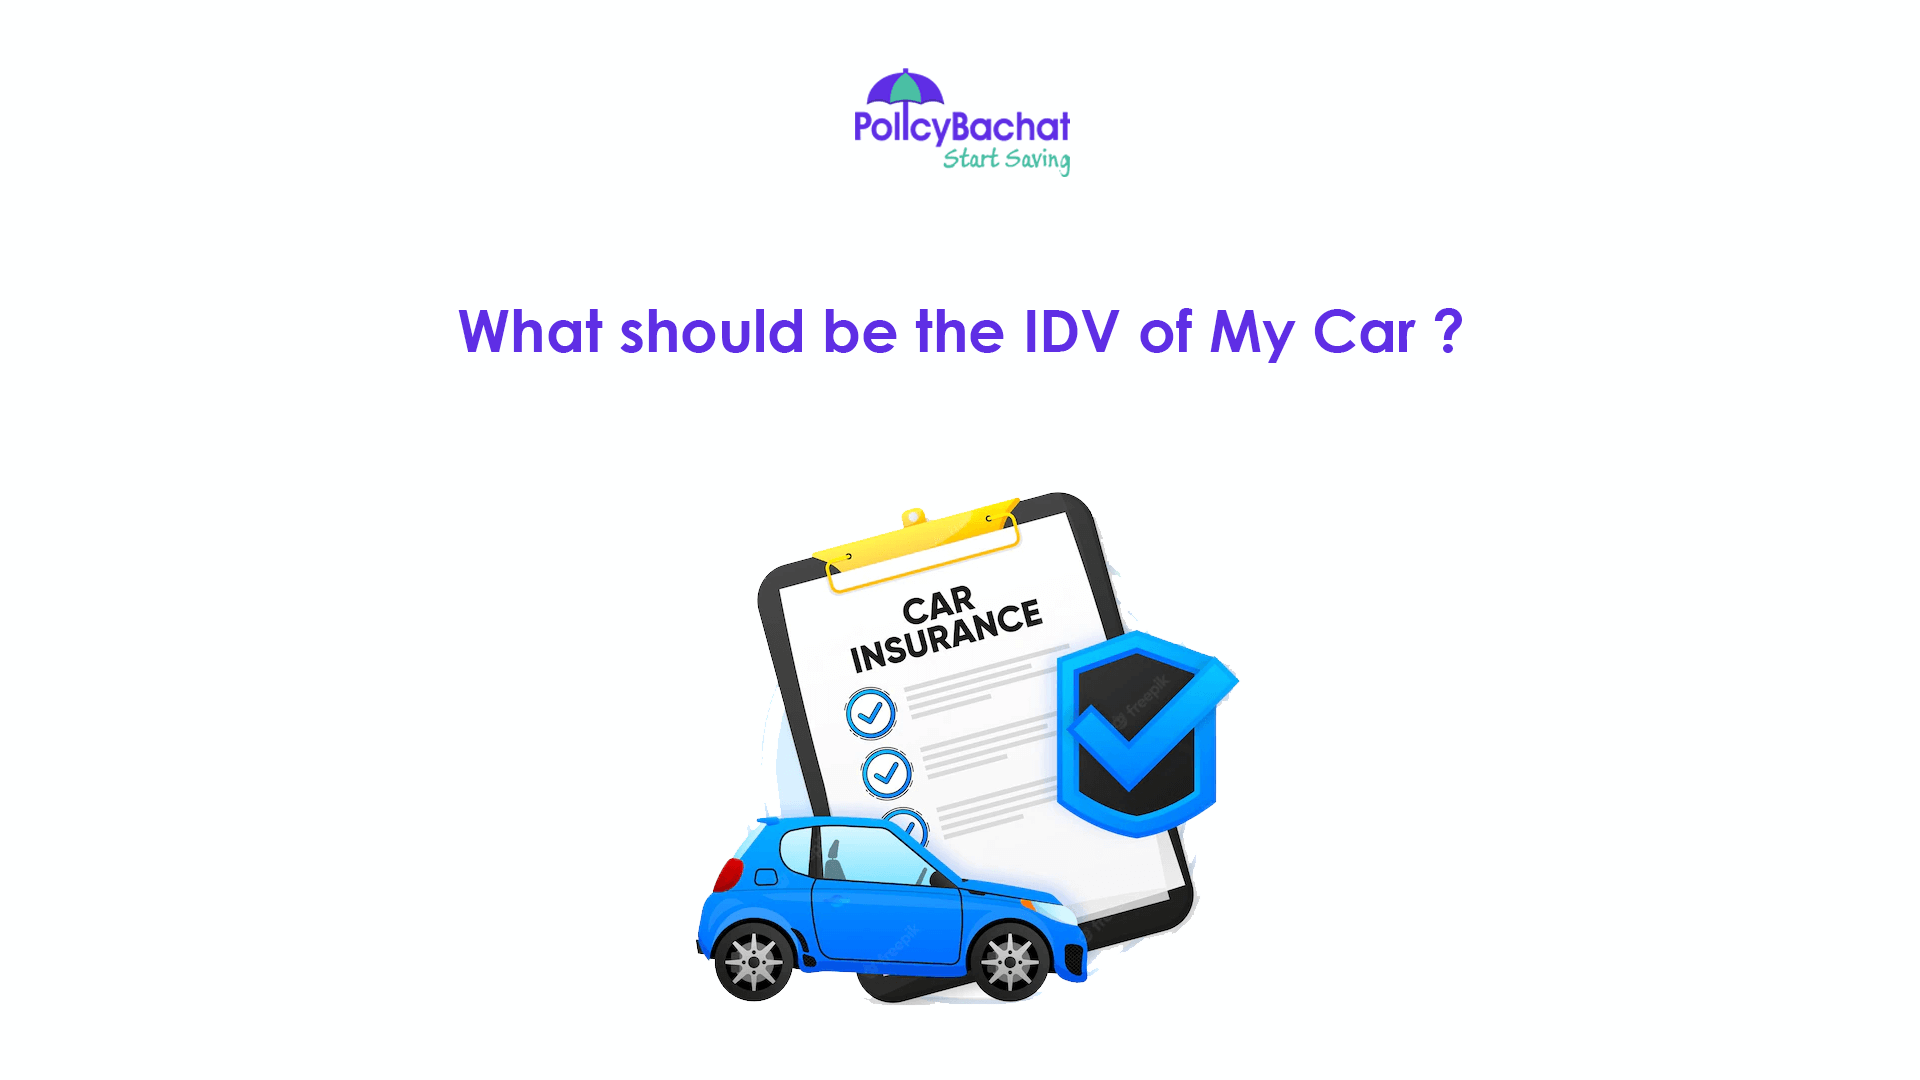 What should be the IDV of My Car? PolicyBachat